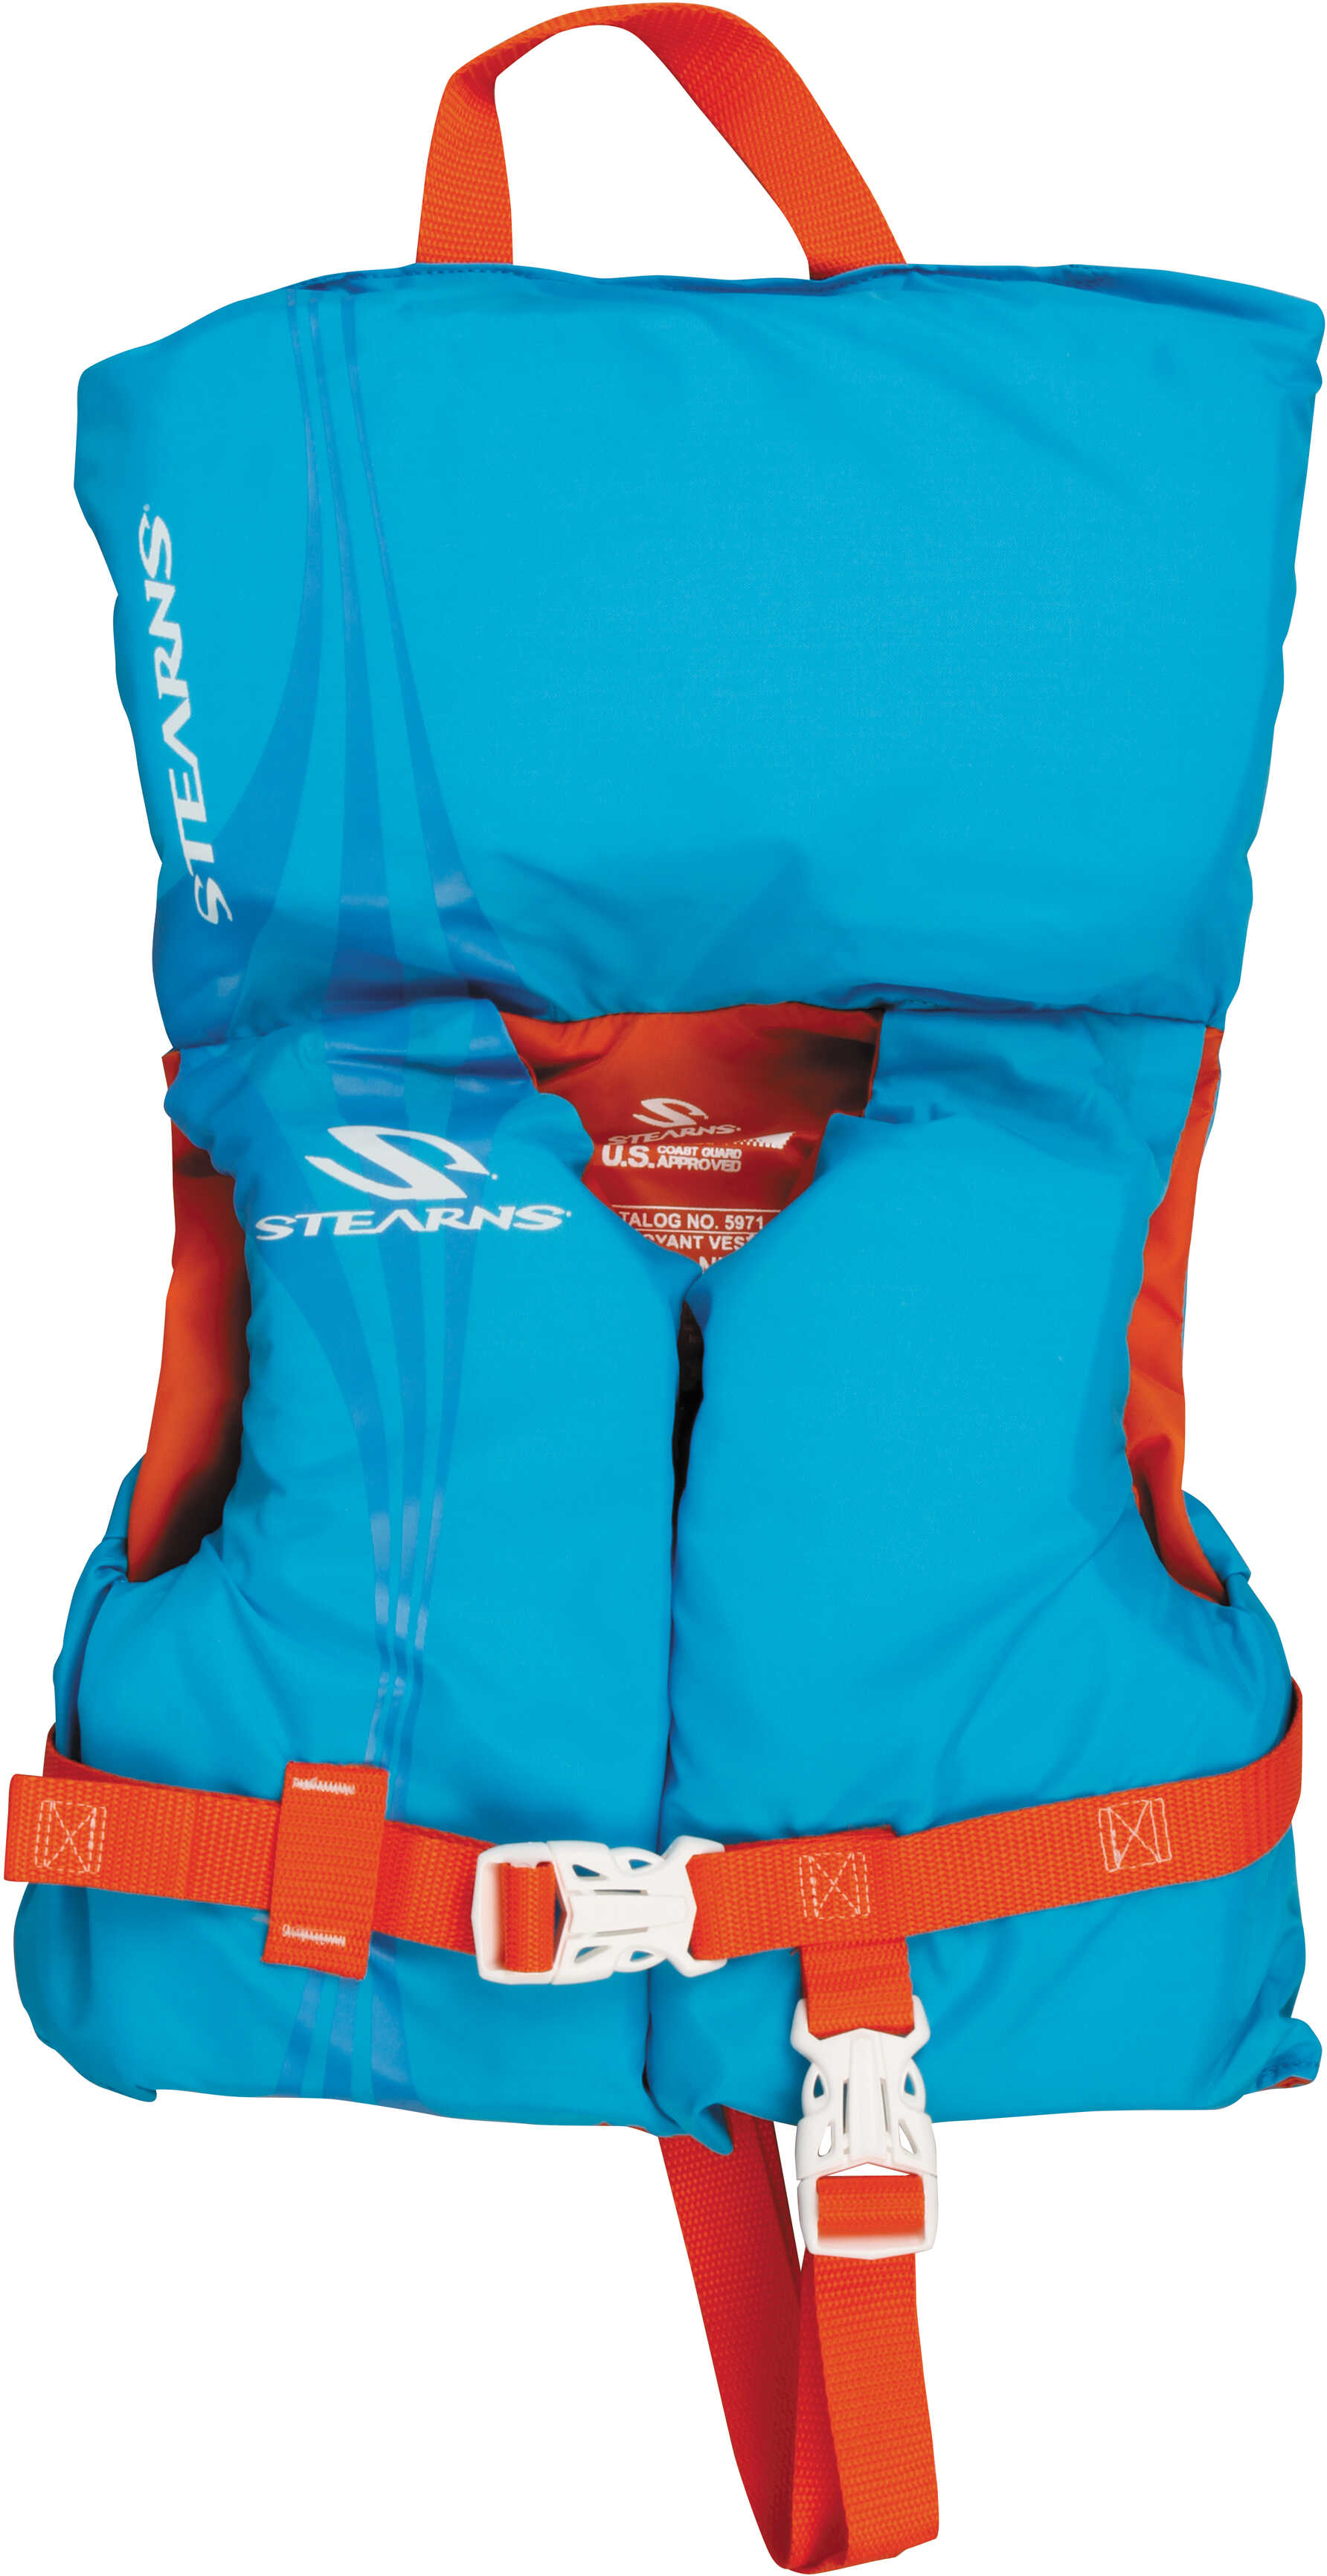 Stearns Infant Classic Nylon Vest Life Jacket - Up to 30lbs - Abstract Wave